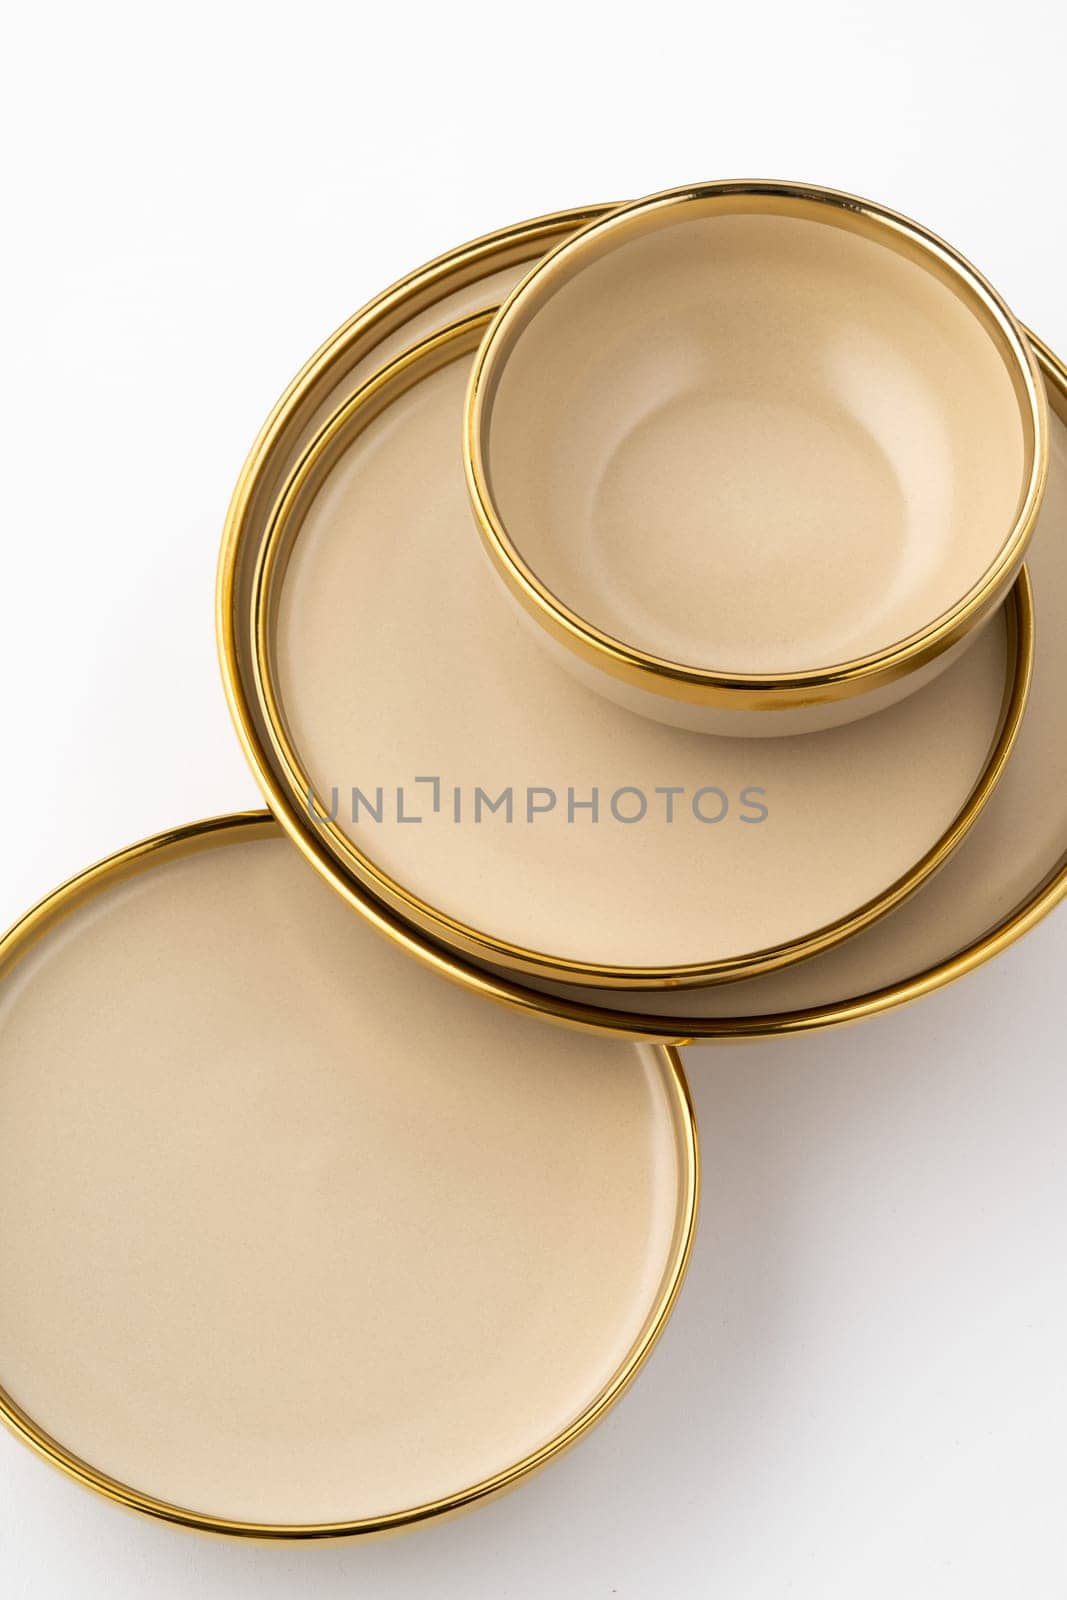 A set of light brown ceramic plate and bowl on a white background. Top view by A_Karim